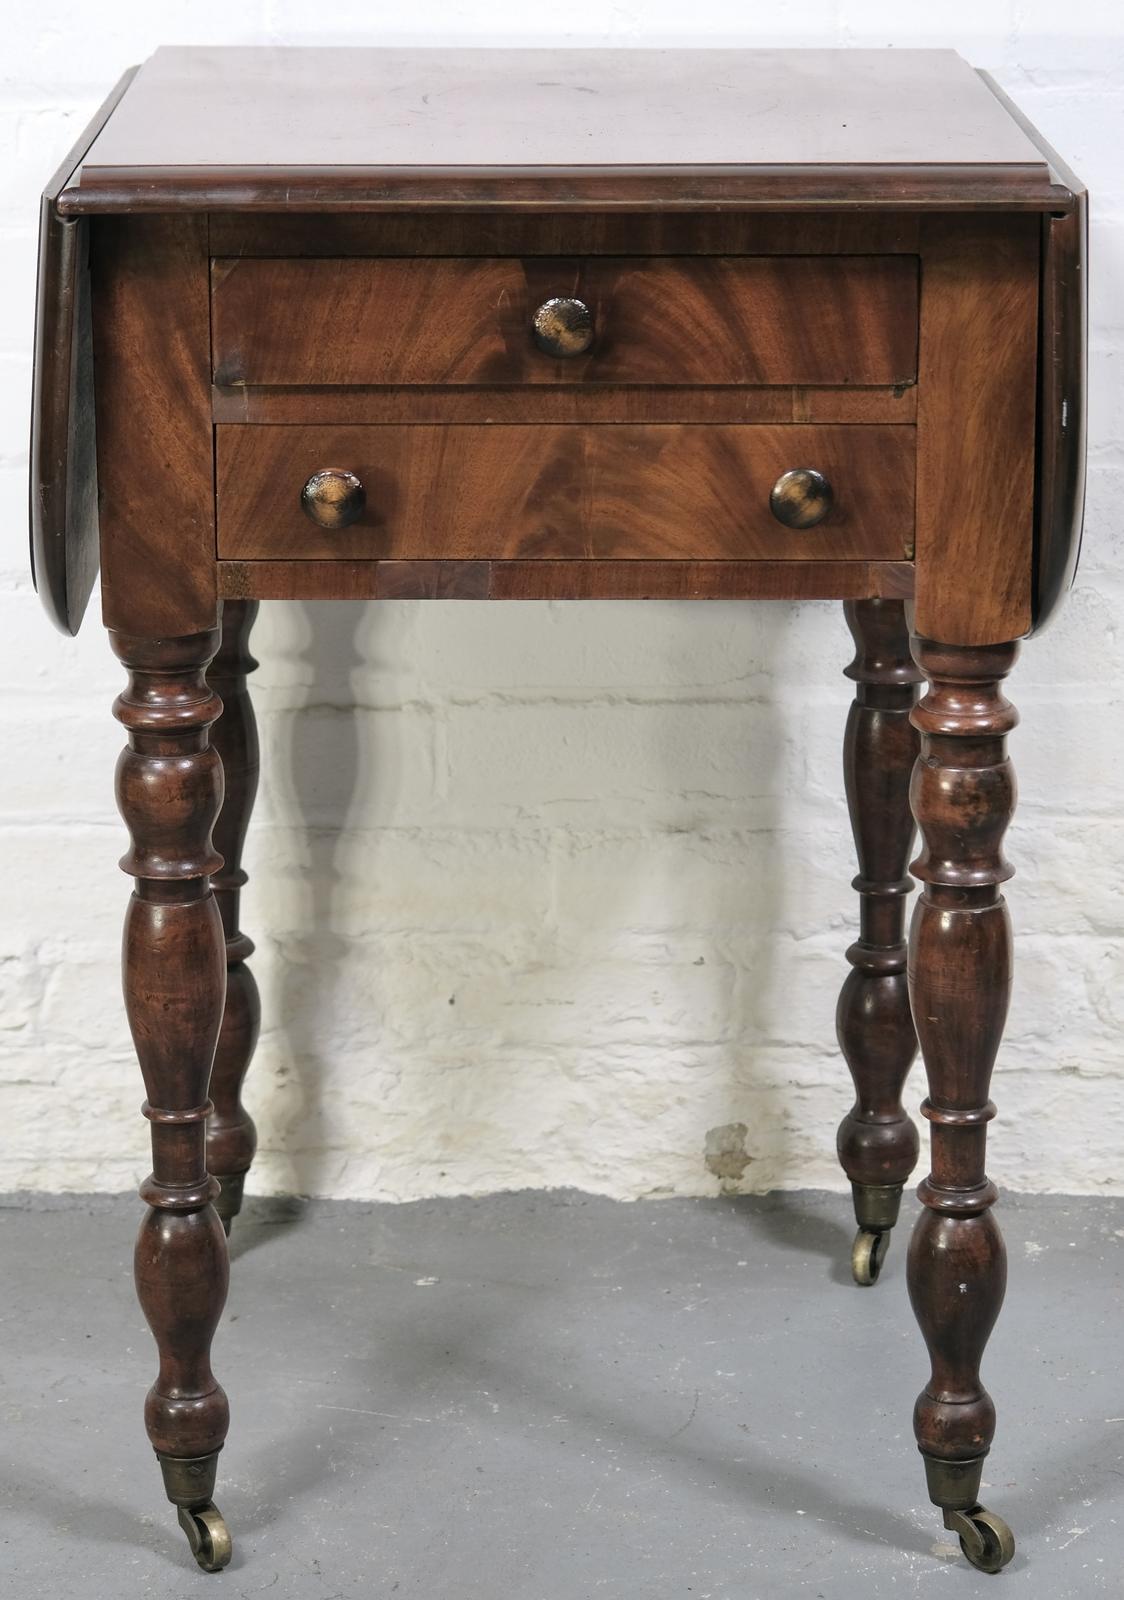 VICTORIAN SIDE TABLE